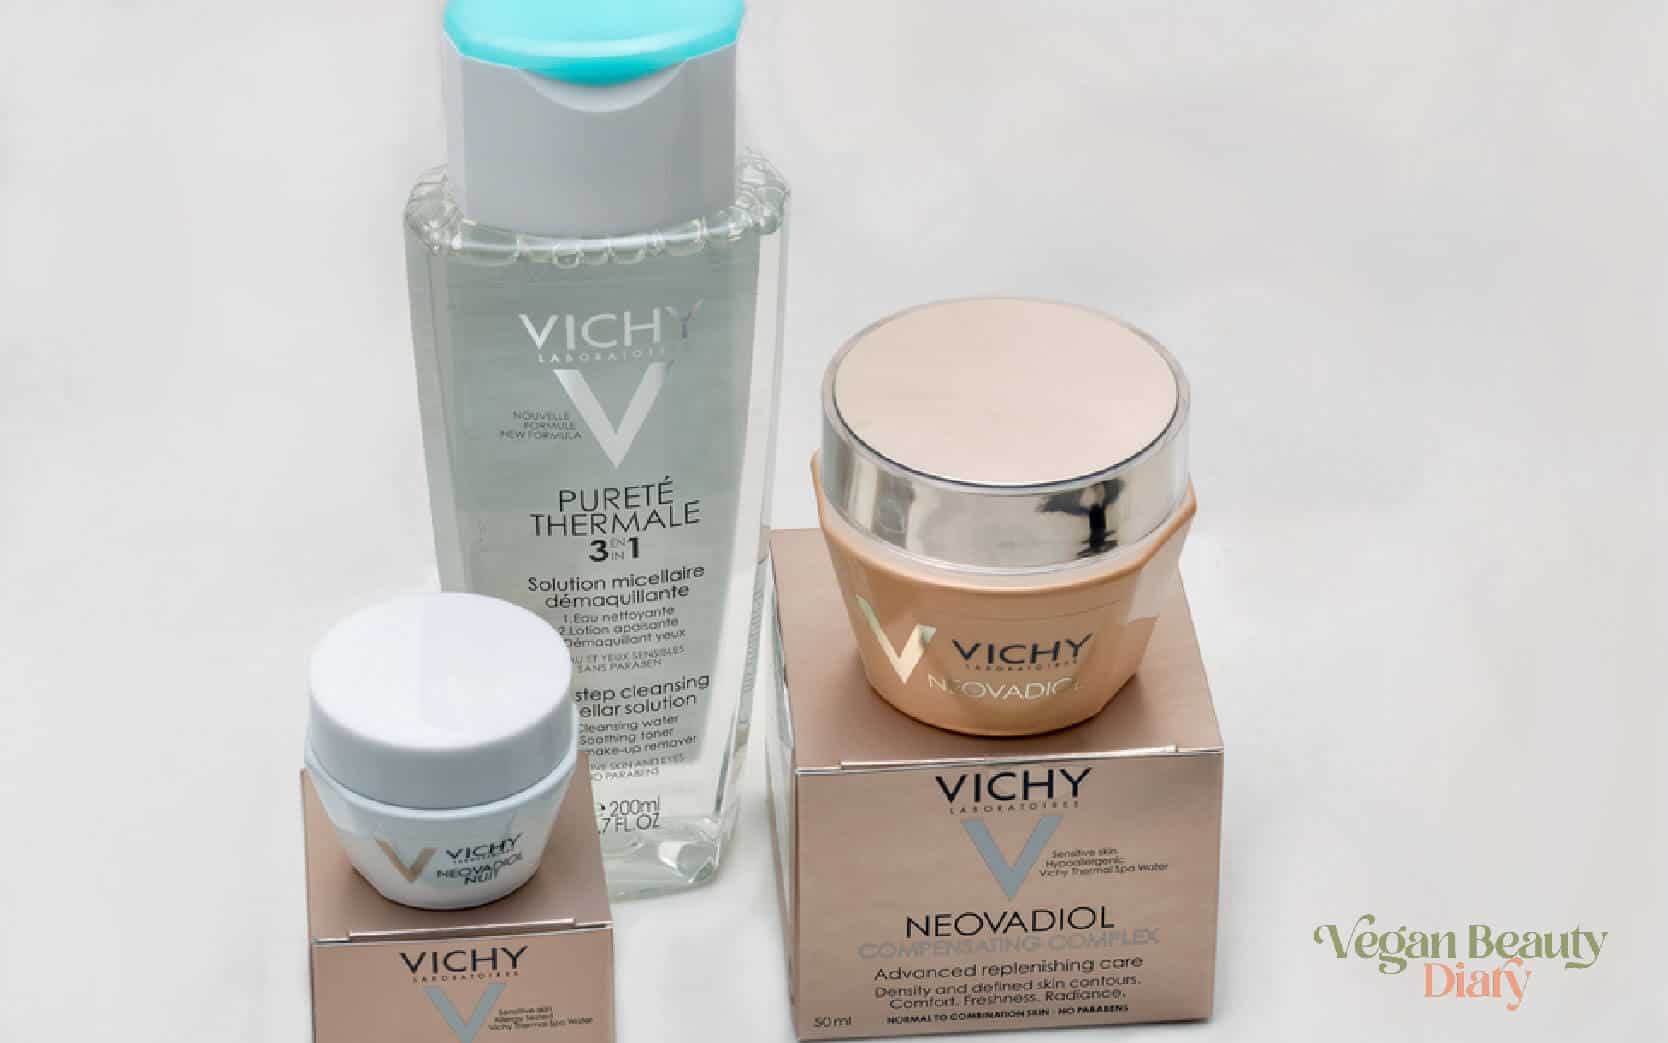 is vichy cruelty free